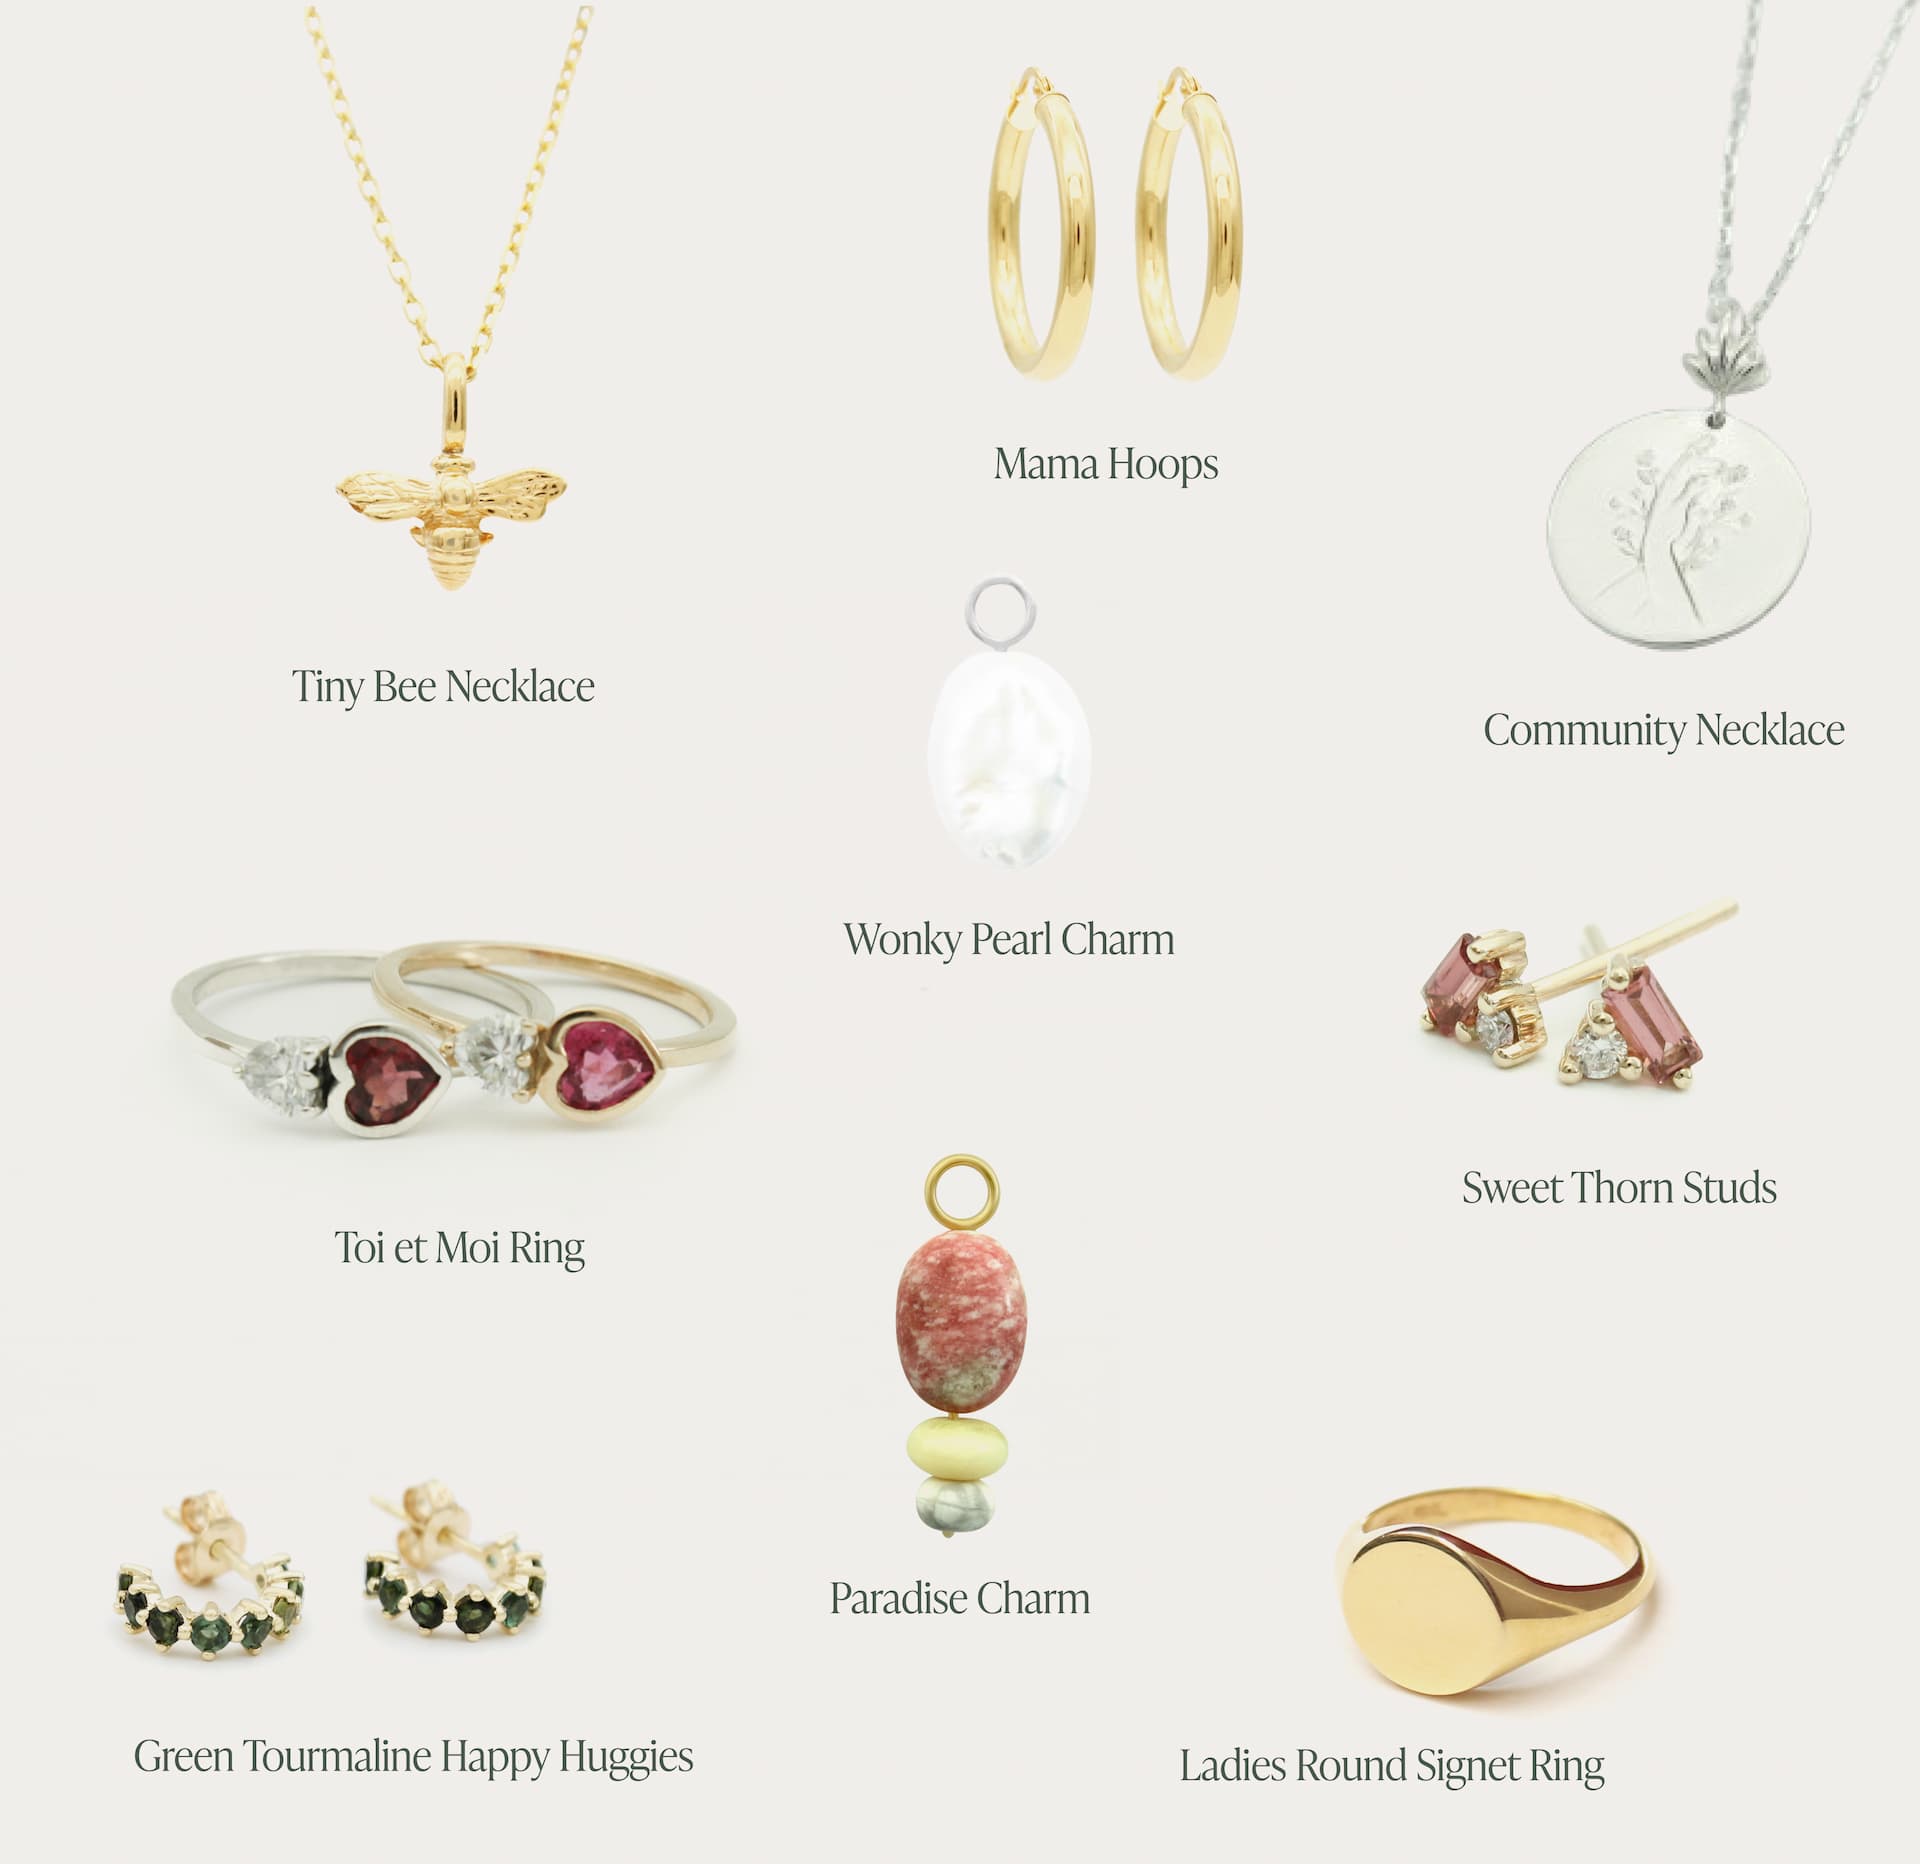 Anna Rosholt's Mother's Day gift guide showing off 9 beautiful pieces of jewellery that mothers will love.